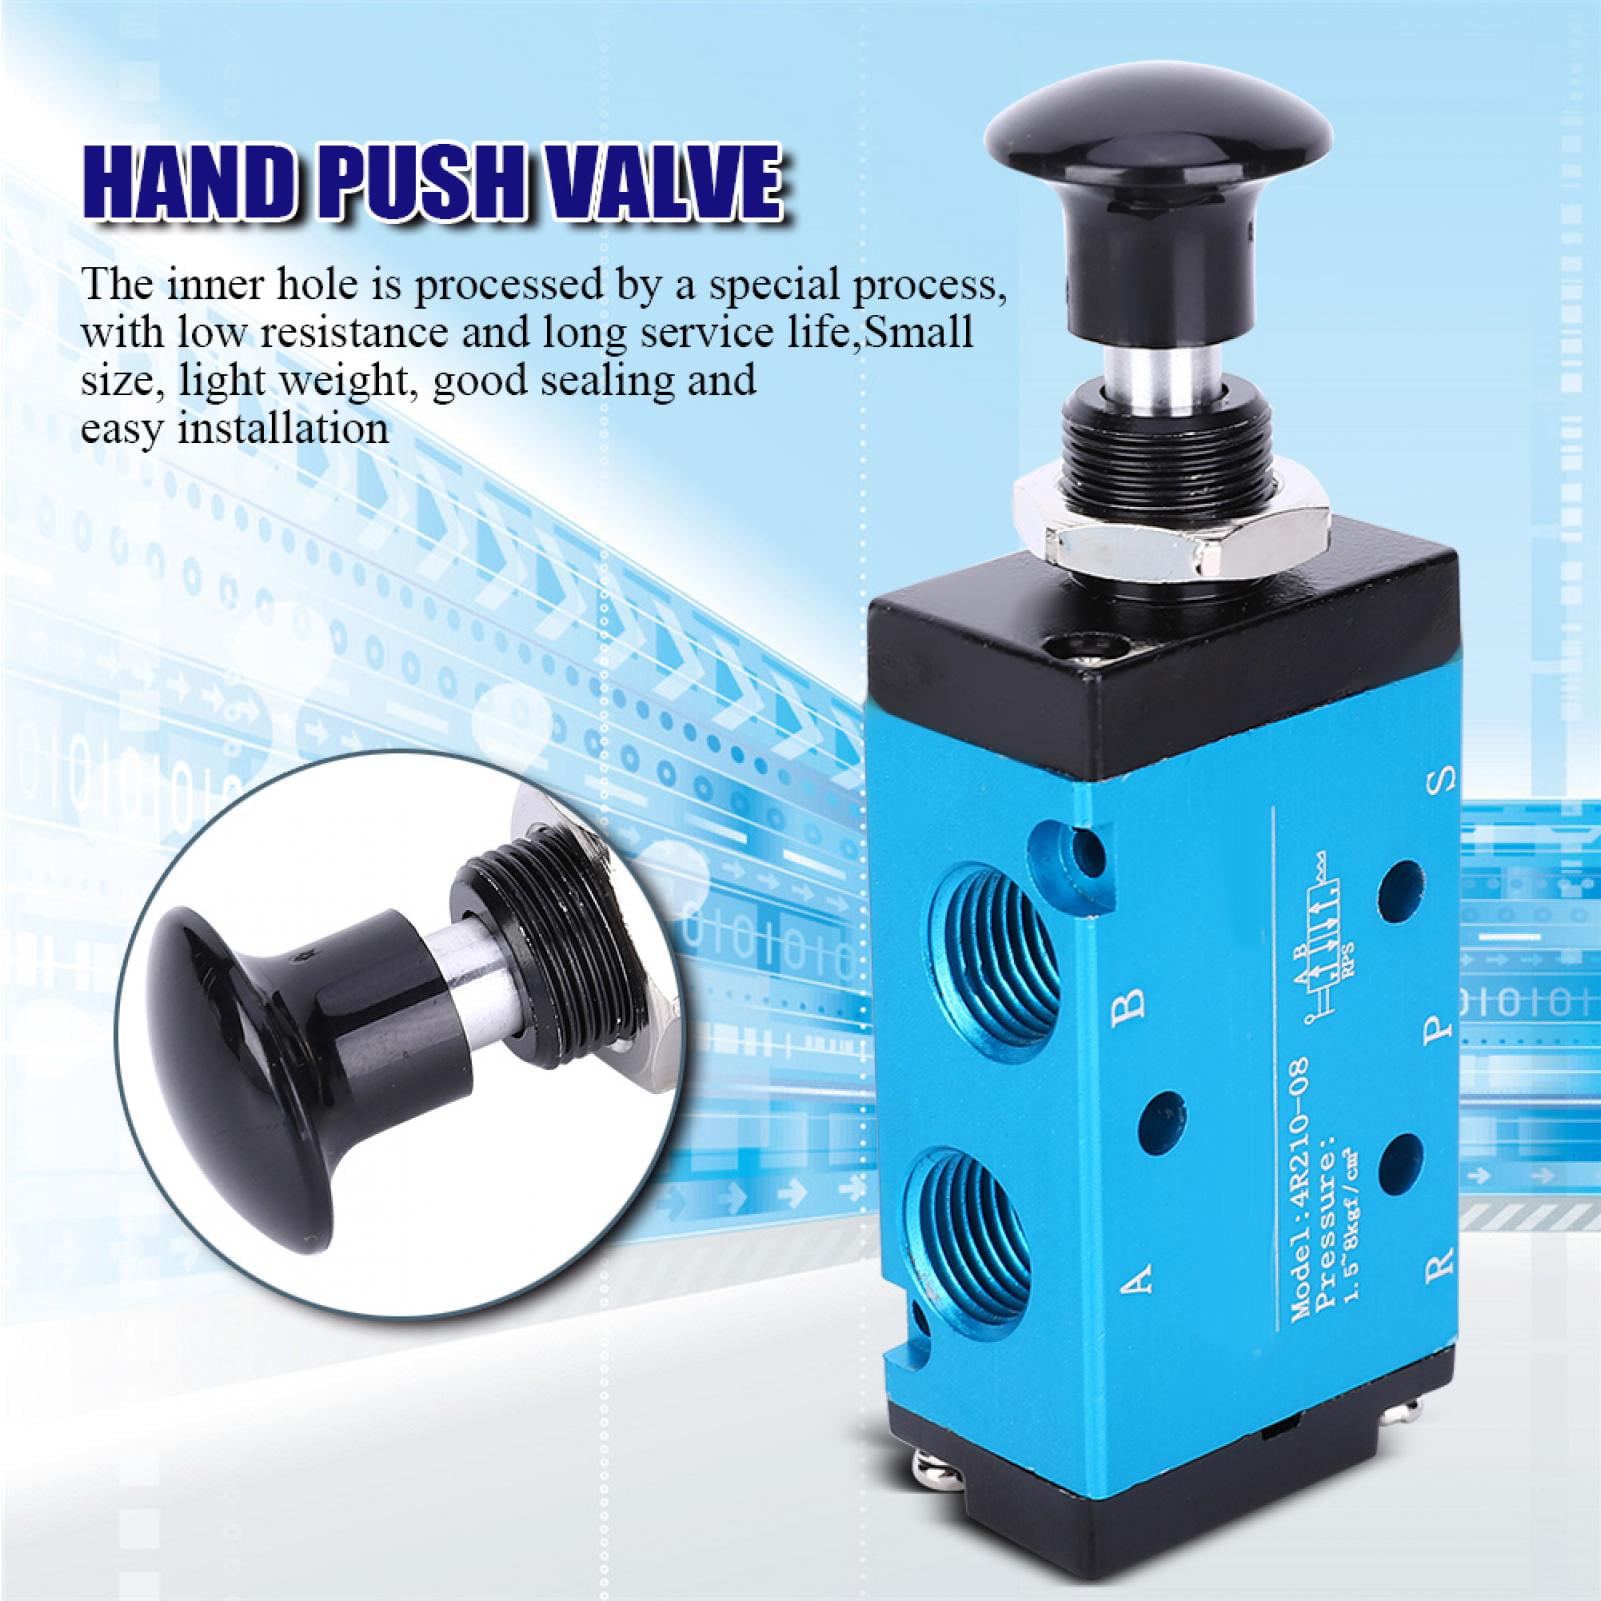 2 Position 5 Way Hand Control Push Valve G1/8 Exhaust G1/4 Inlet Hand Pull Mechanical Valve Round Air Control Valve Hand Operate Pneumatic valve